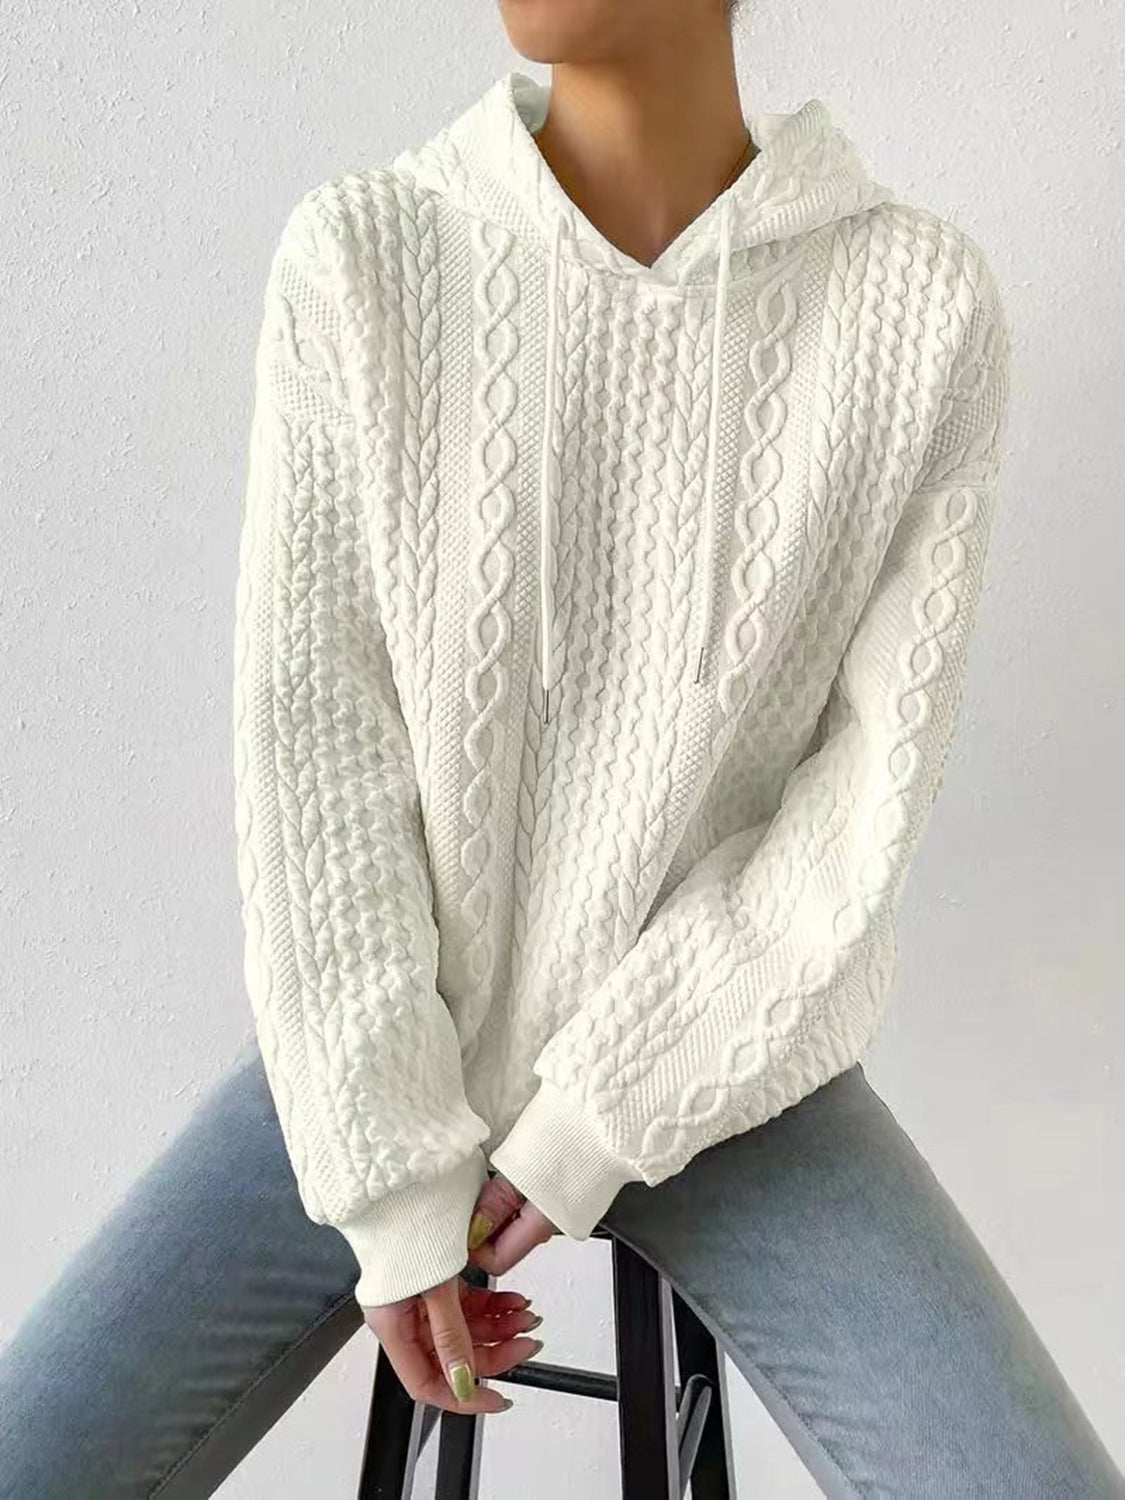 Textured Drawstring Long Sleeve Hoodie - Beige / S - Women’s Clothing & Accessories - Shirts & Tops - 26 - 2024